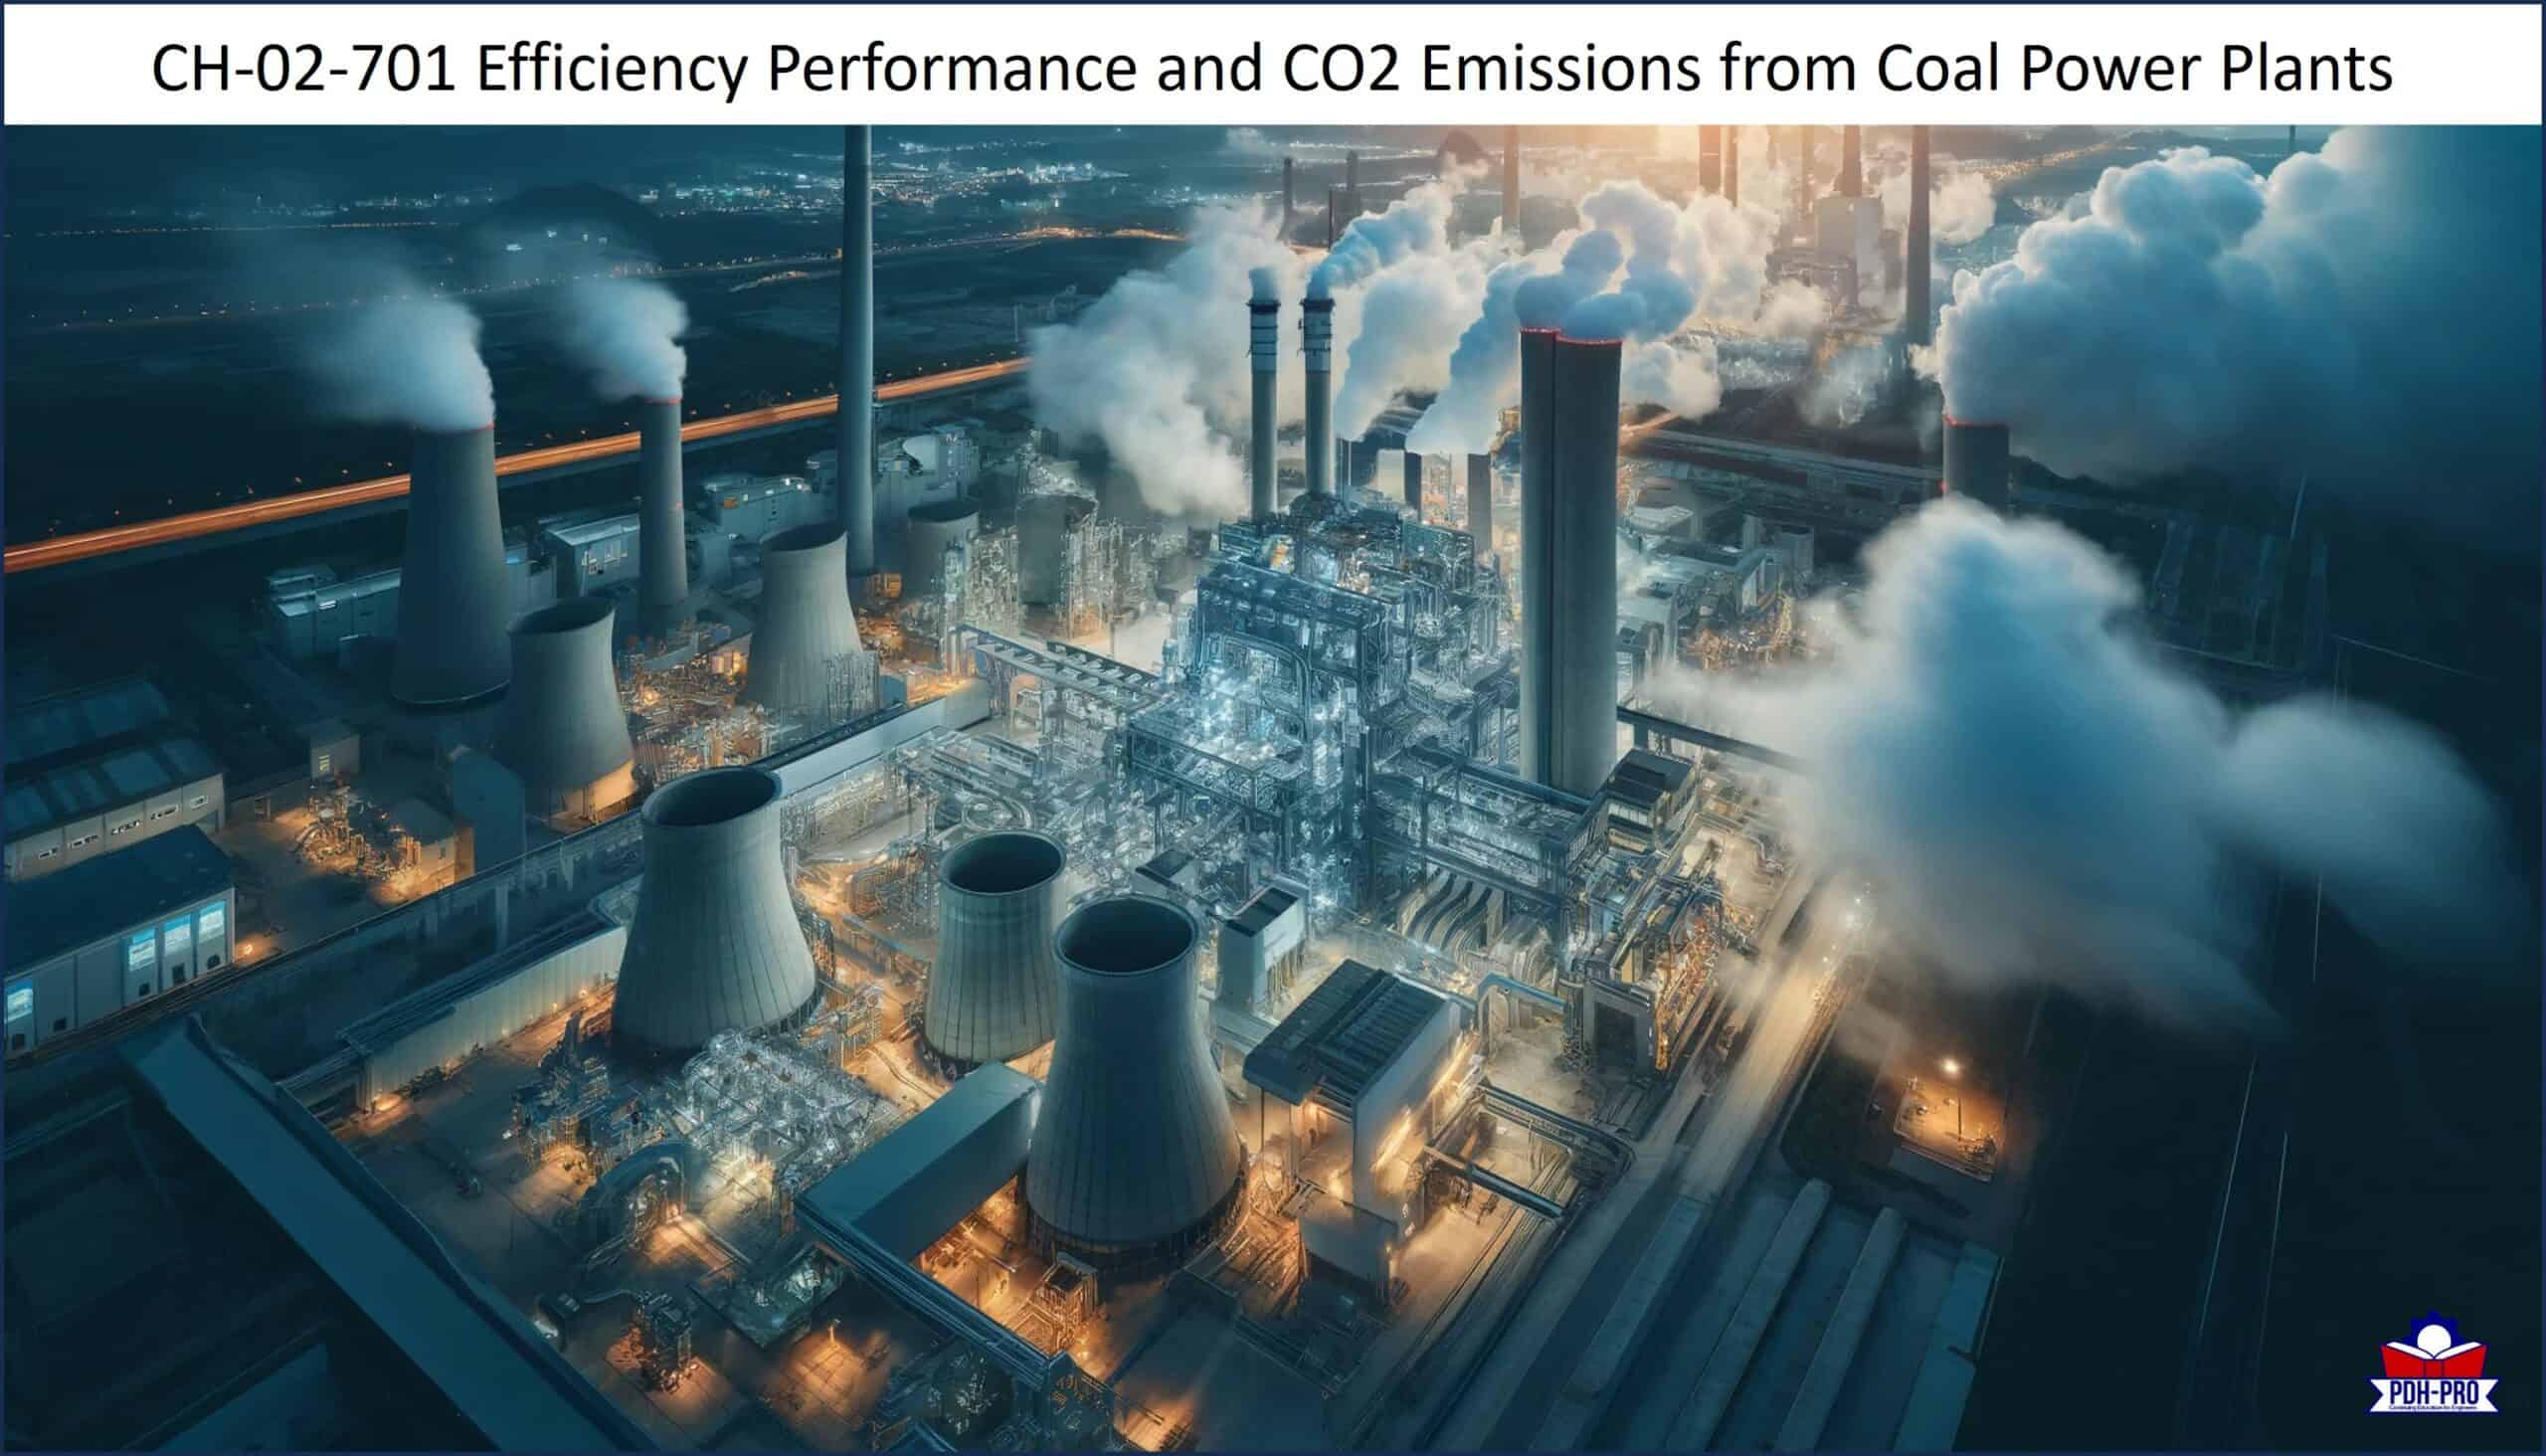 Efficiency Performance and CO2 Emissions from Coal Power Plants